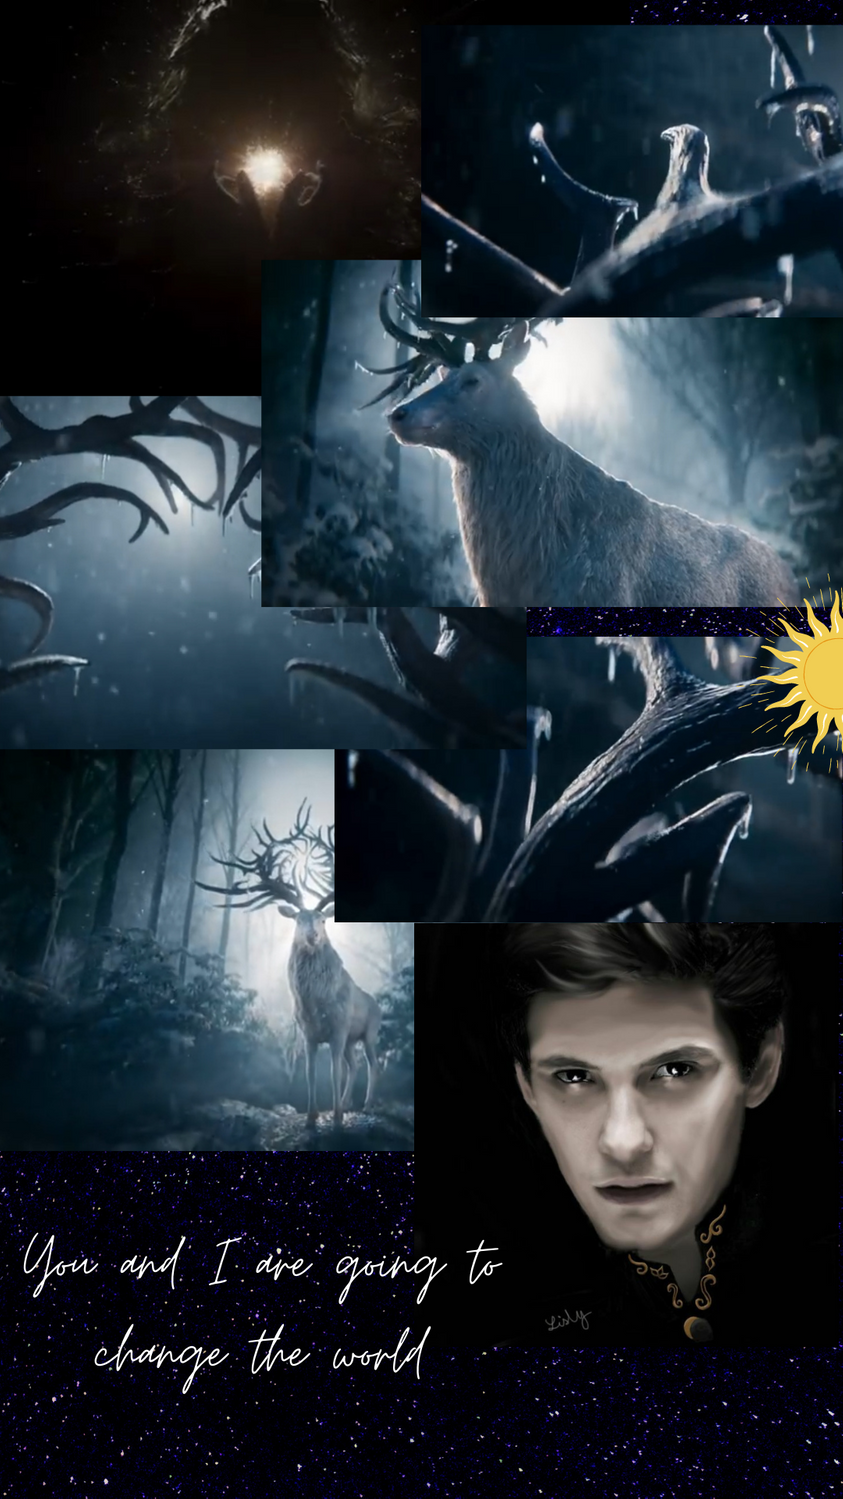 Shadow And Bone Wallpapers